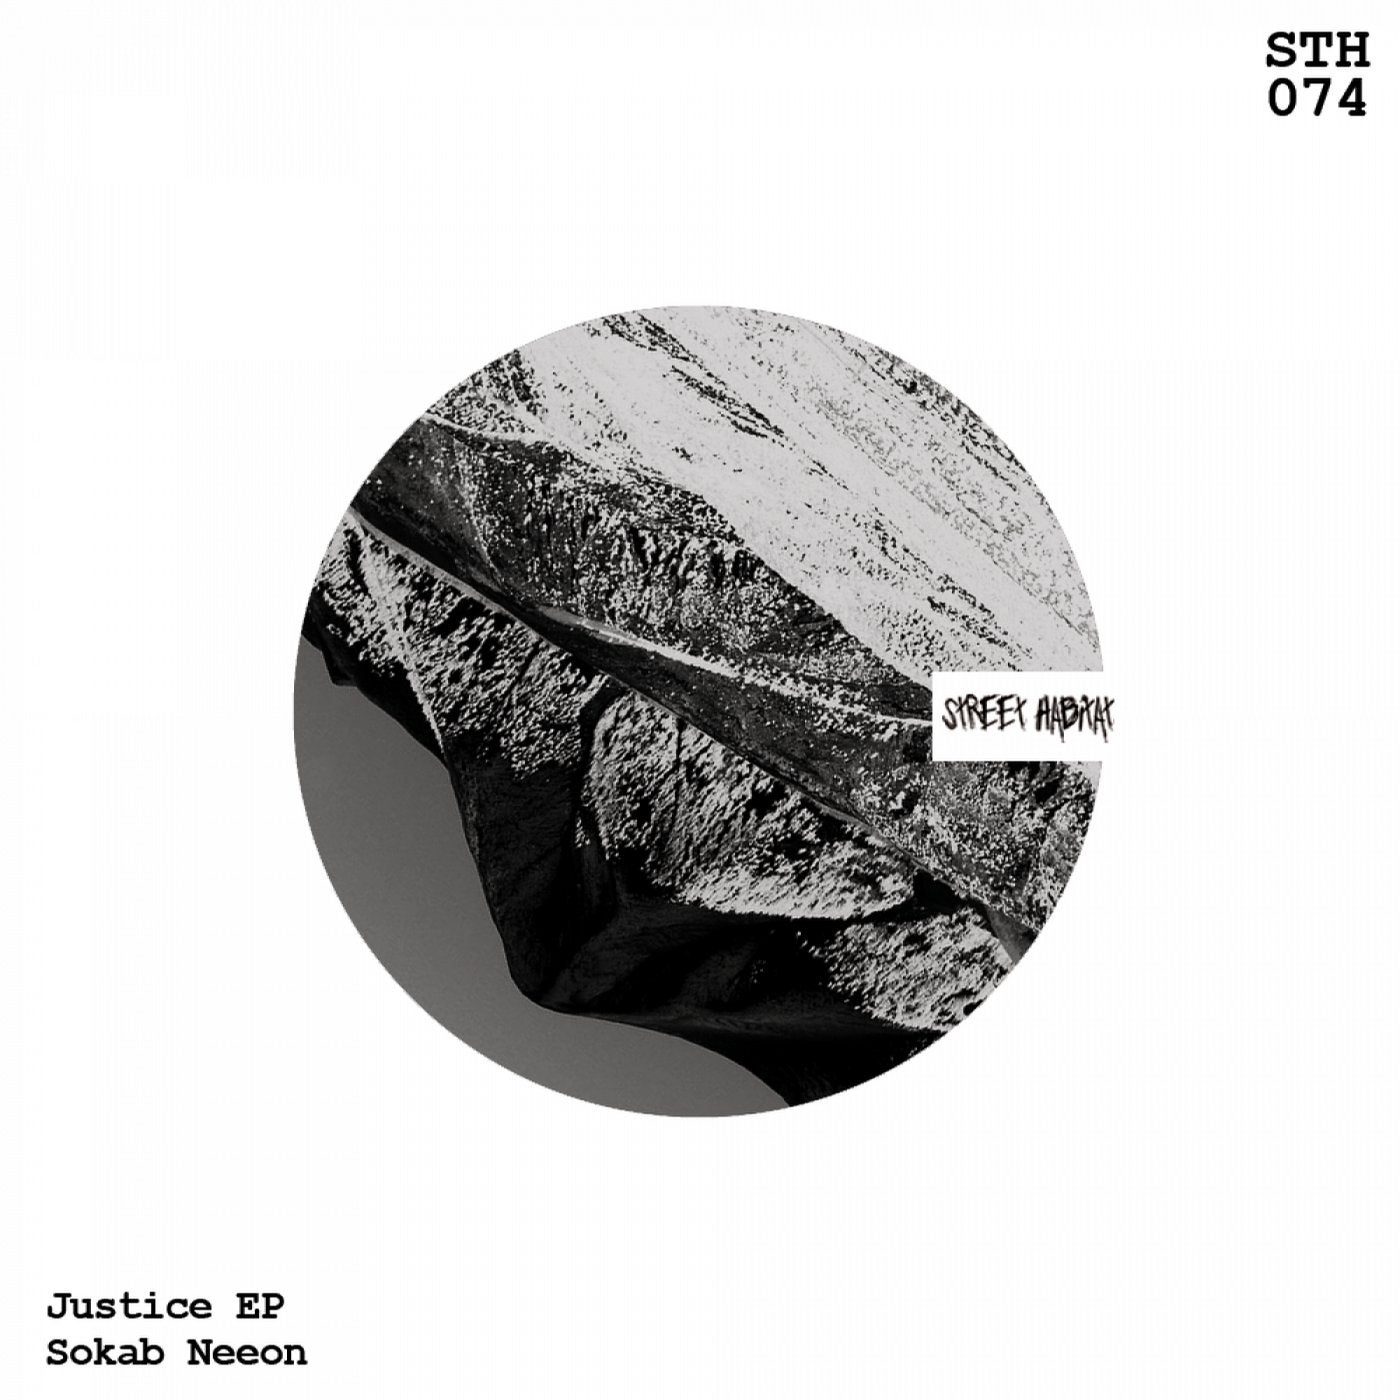 Justice EP